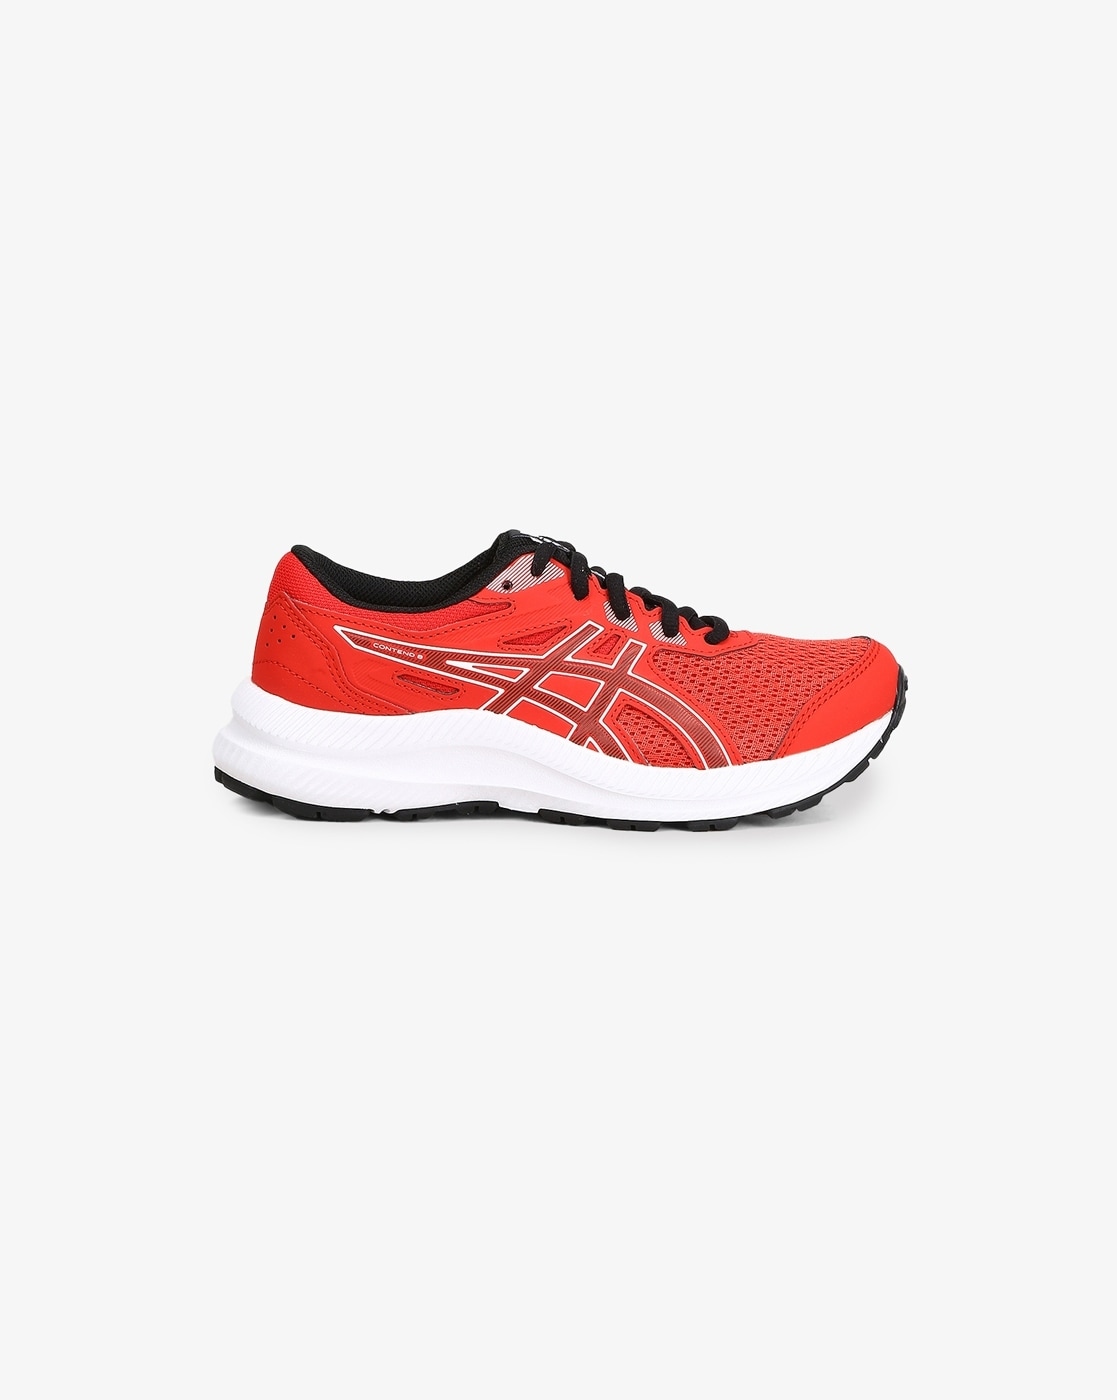 Men's GEL-QUANTUM 180 | Classic Red/Classic Red | Sportstyle Shoes | ASICS